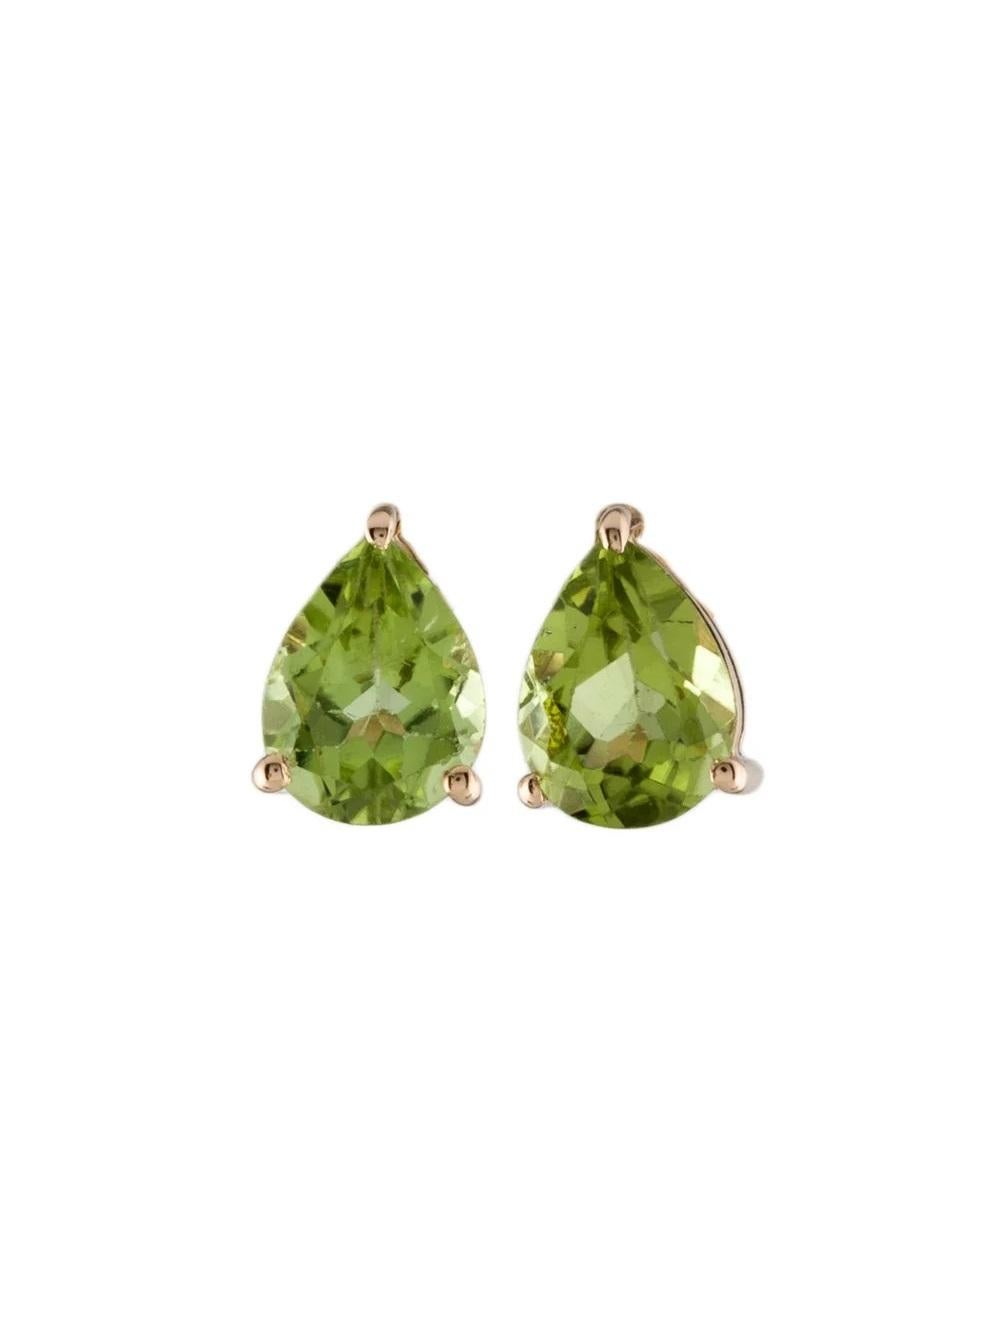 14K 1.97ctw Peridot Stud Earrings  Elegant Yellow Gold Gemstone Jewelry In New Condition For Sale In Holtsville, NY